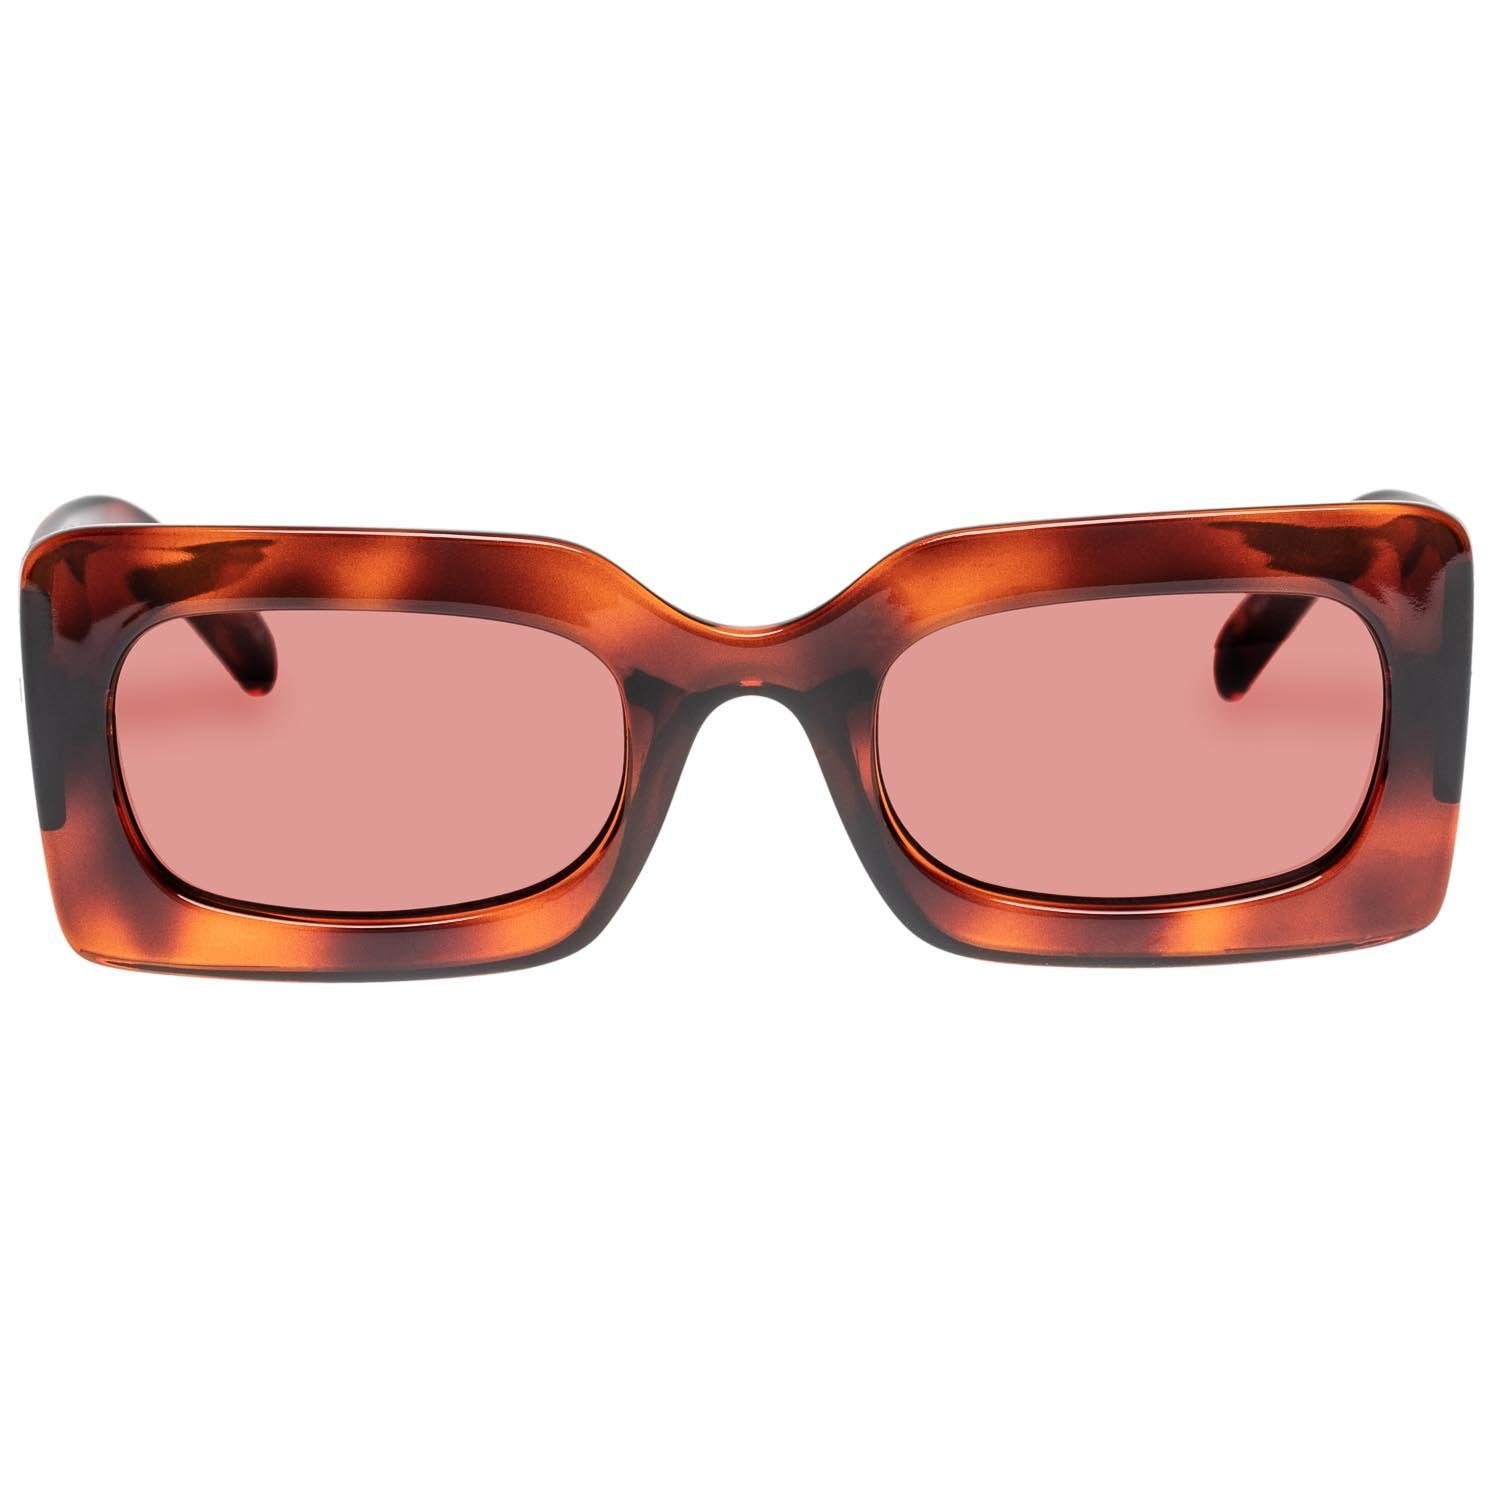 Le Specs | Oh Damn! | Toffee Tort